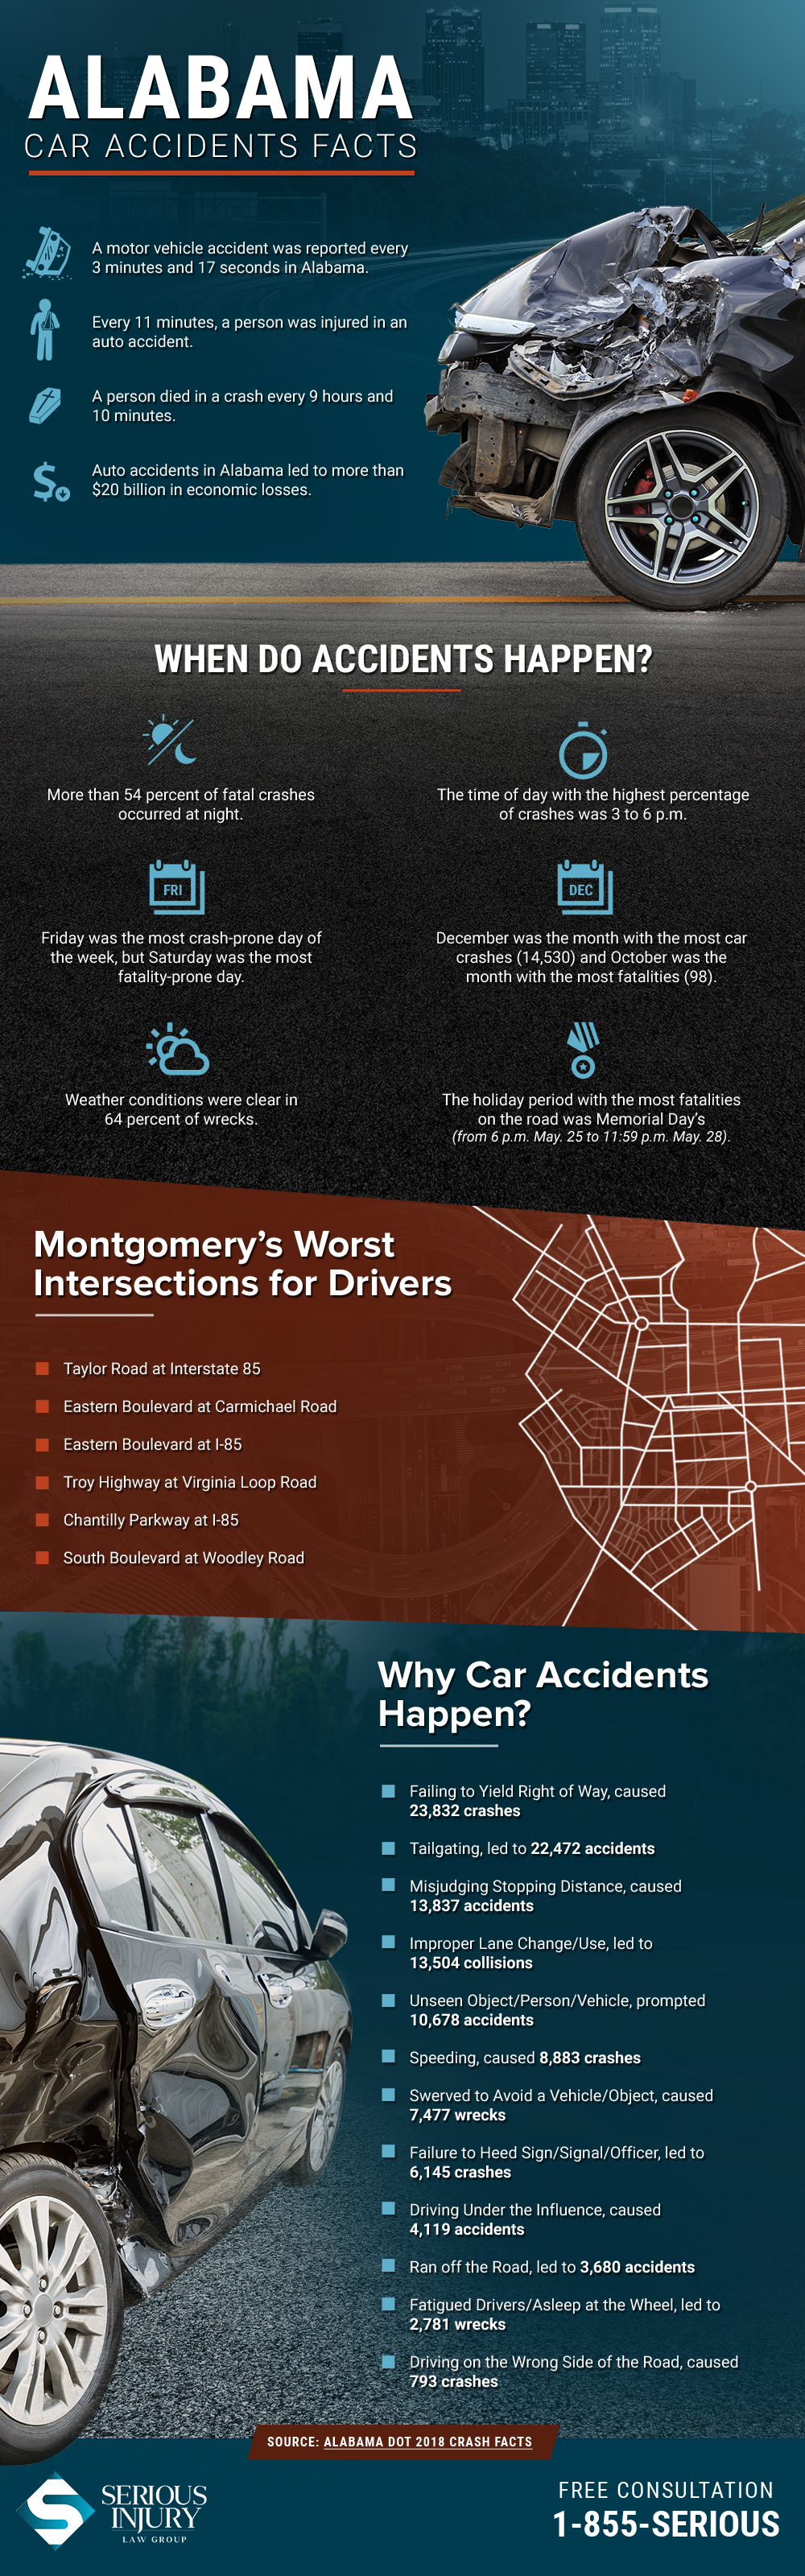 Alabama Car Accident Facts Infographic